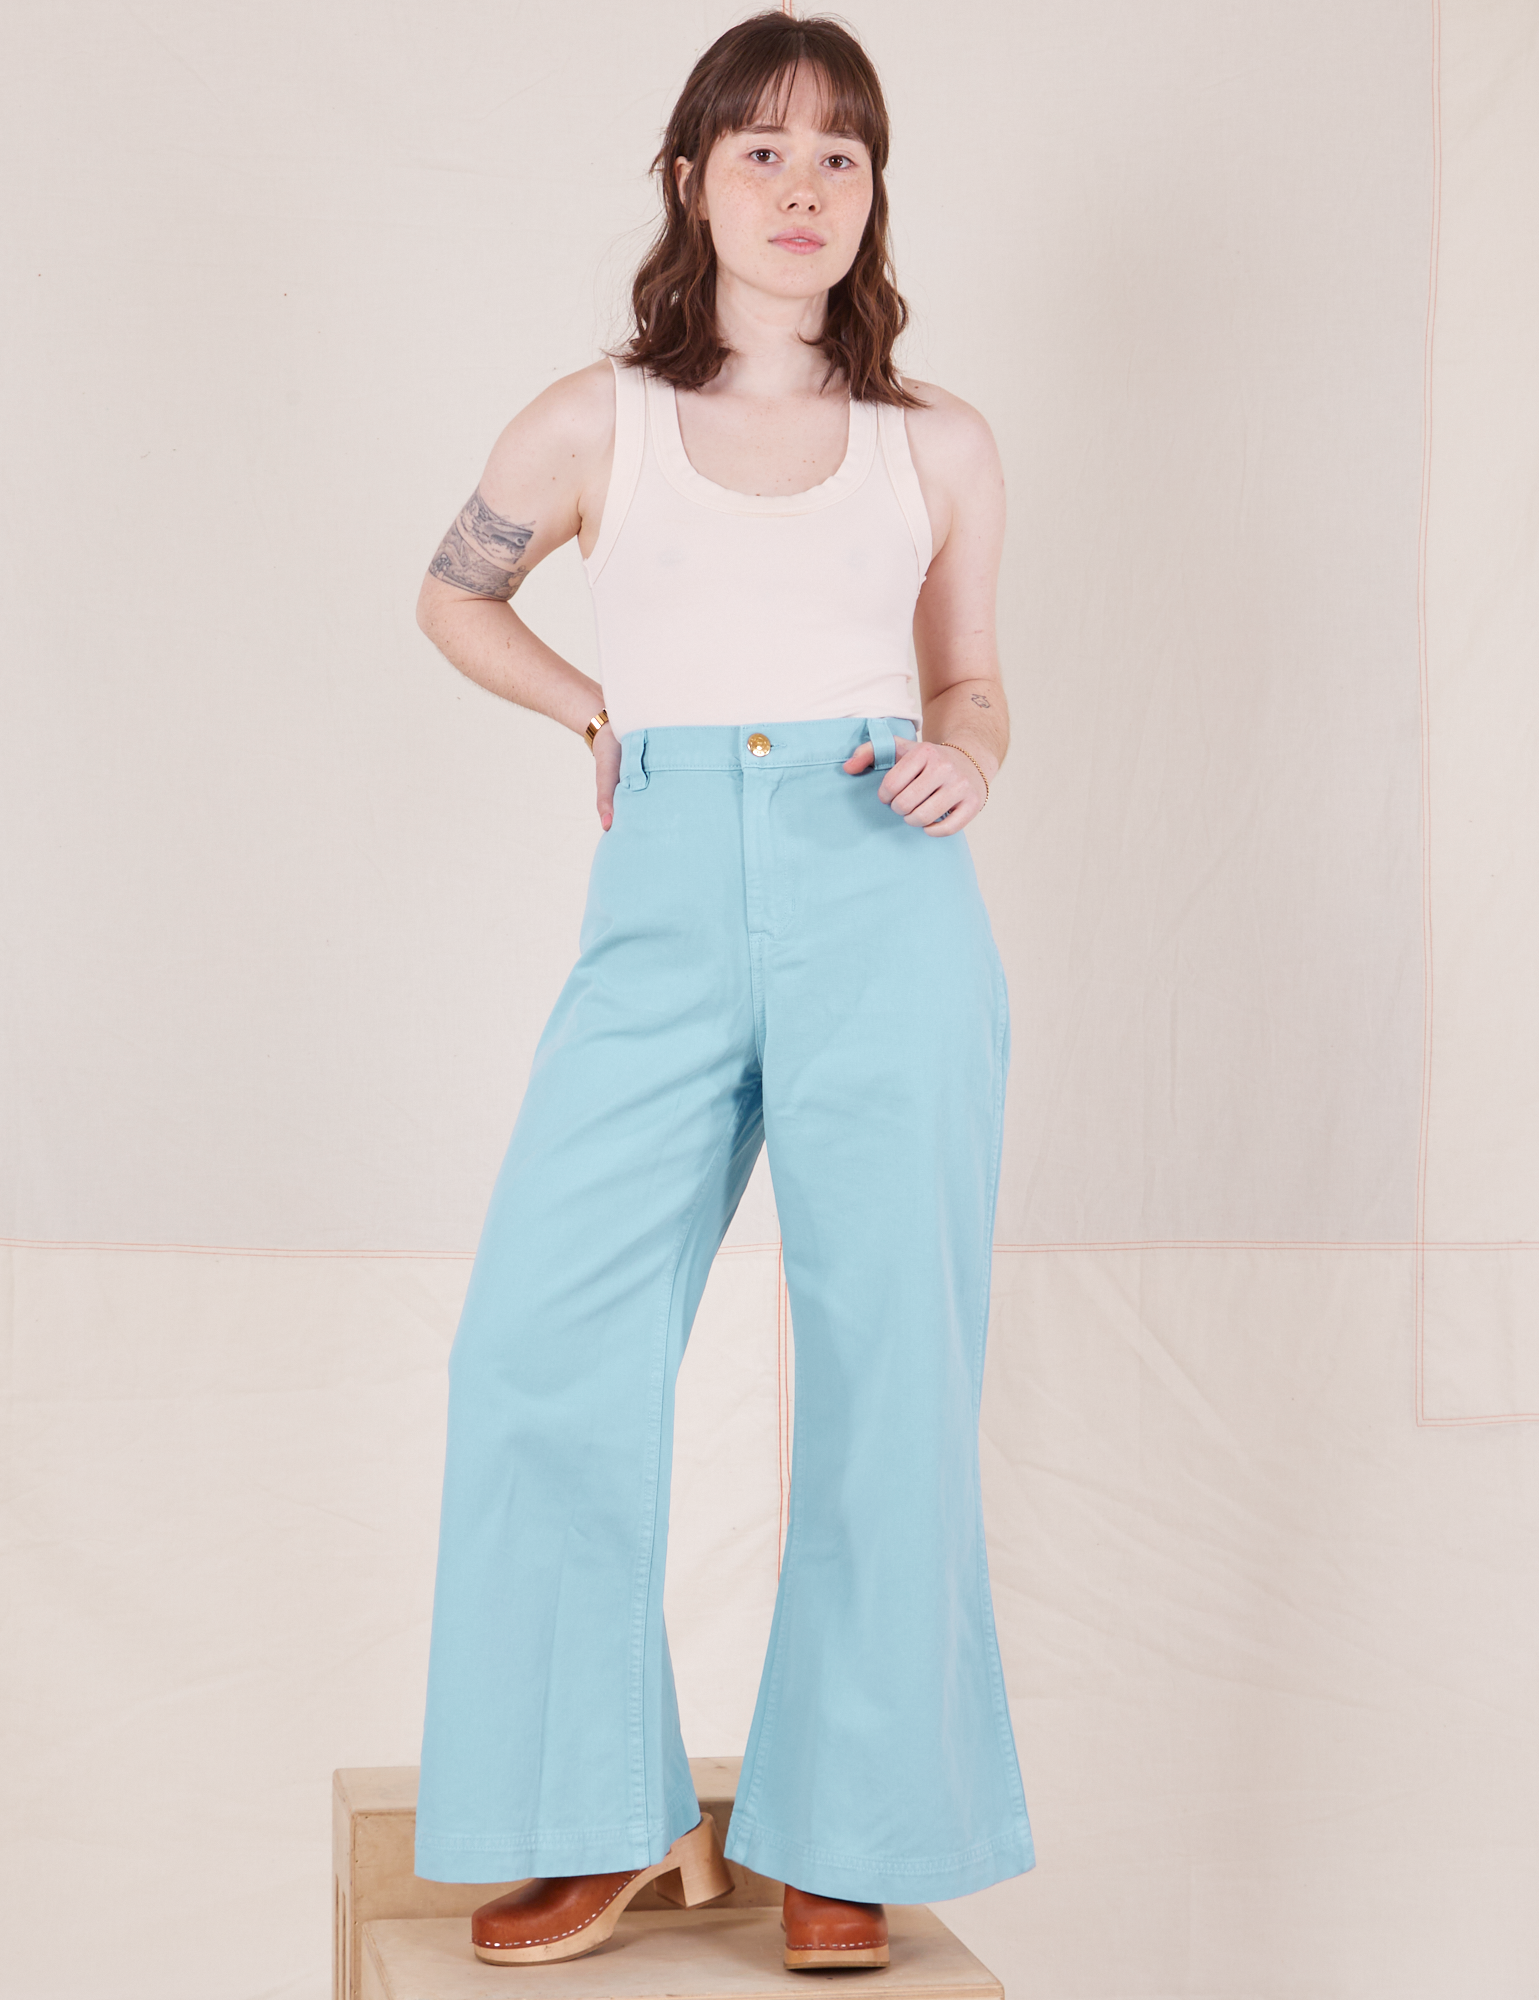 Hana is 5&#39;3&quot; and wearing XXS Bell Bottoms in Baby Blue paired with vintage off-white Tank Top